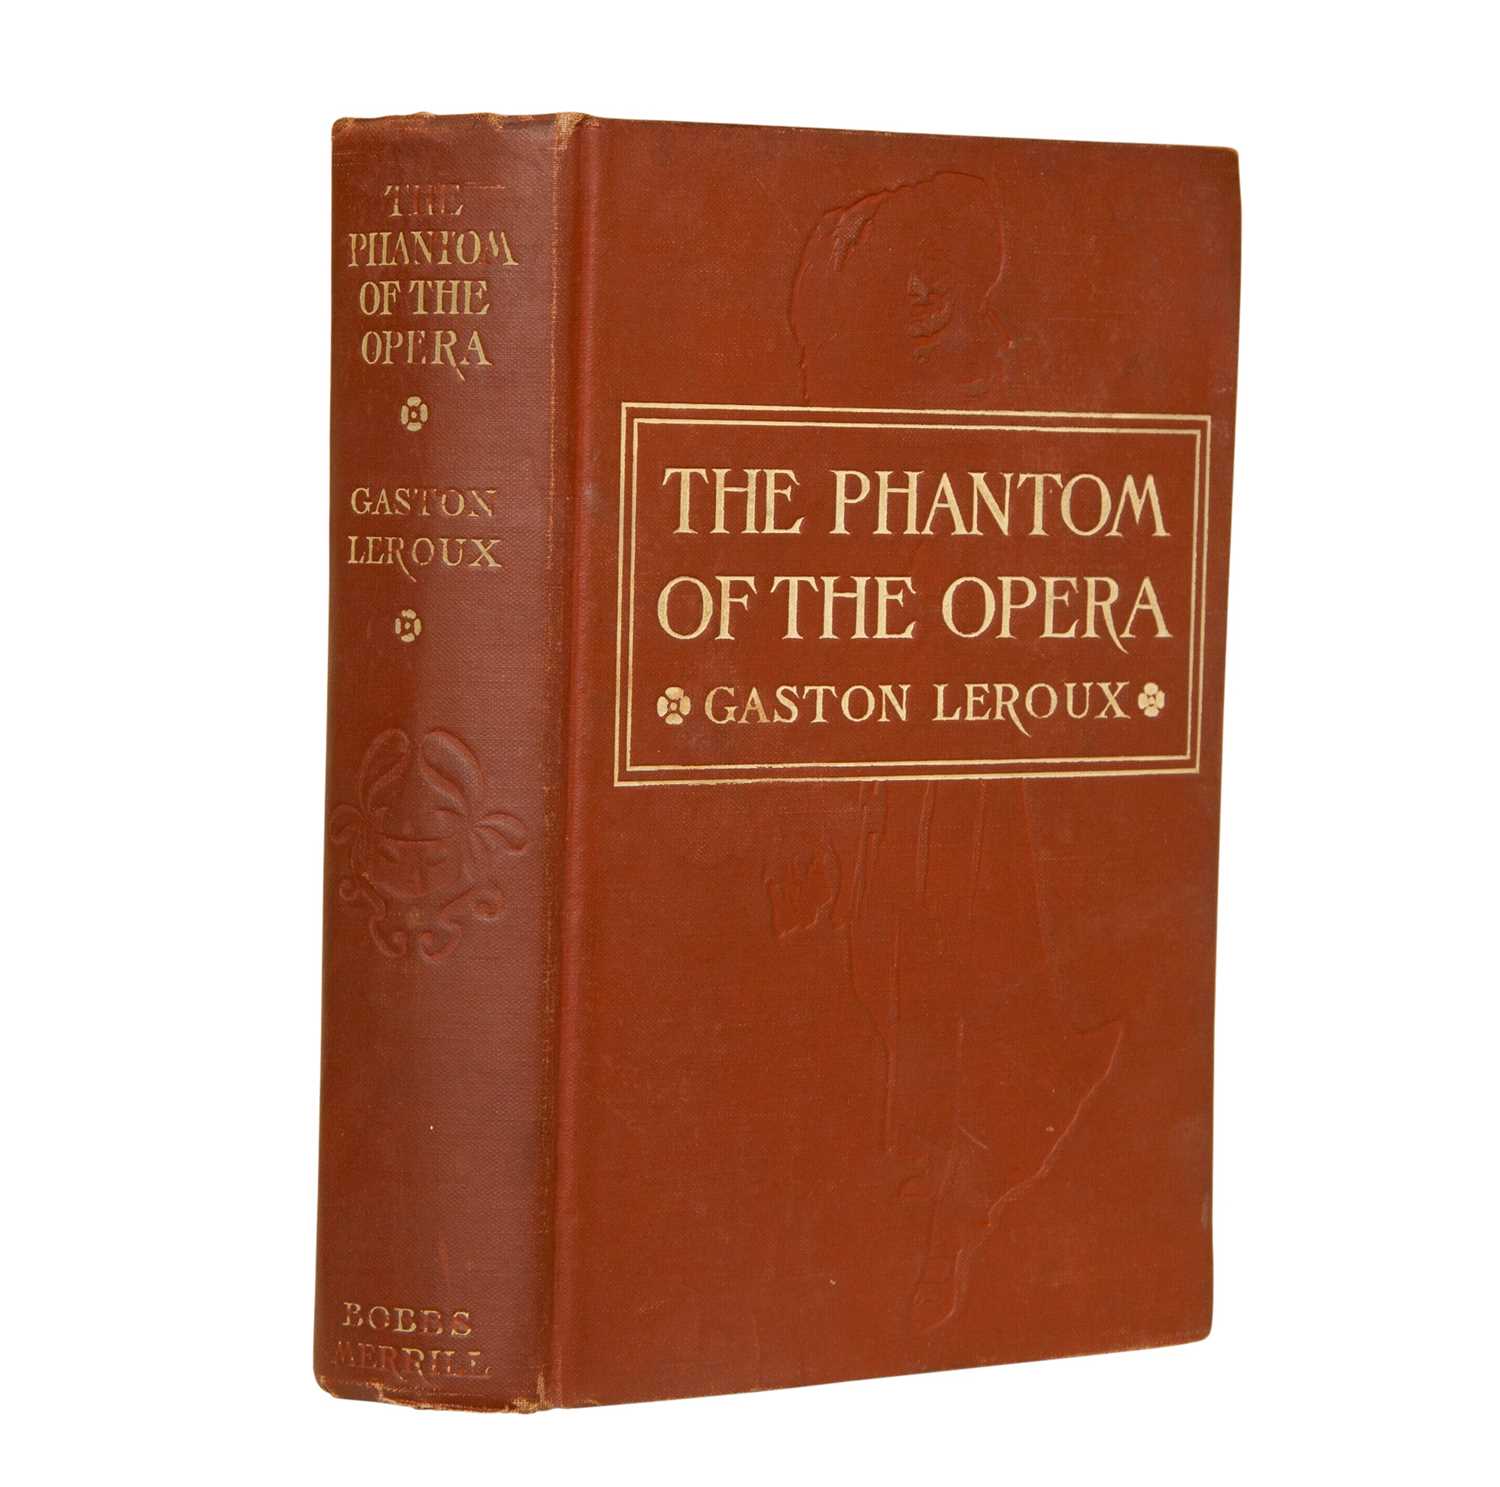 Lot 249 - The rare first American edition of The Phantom of the Opera